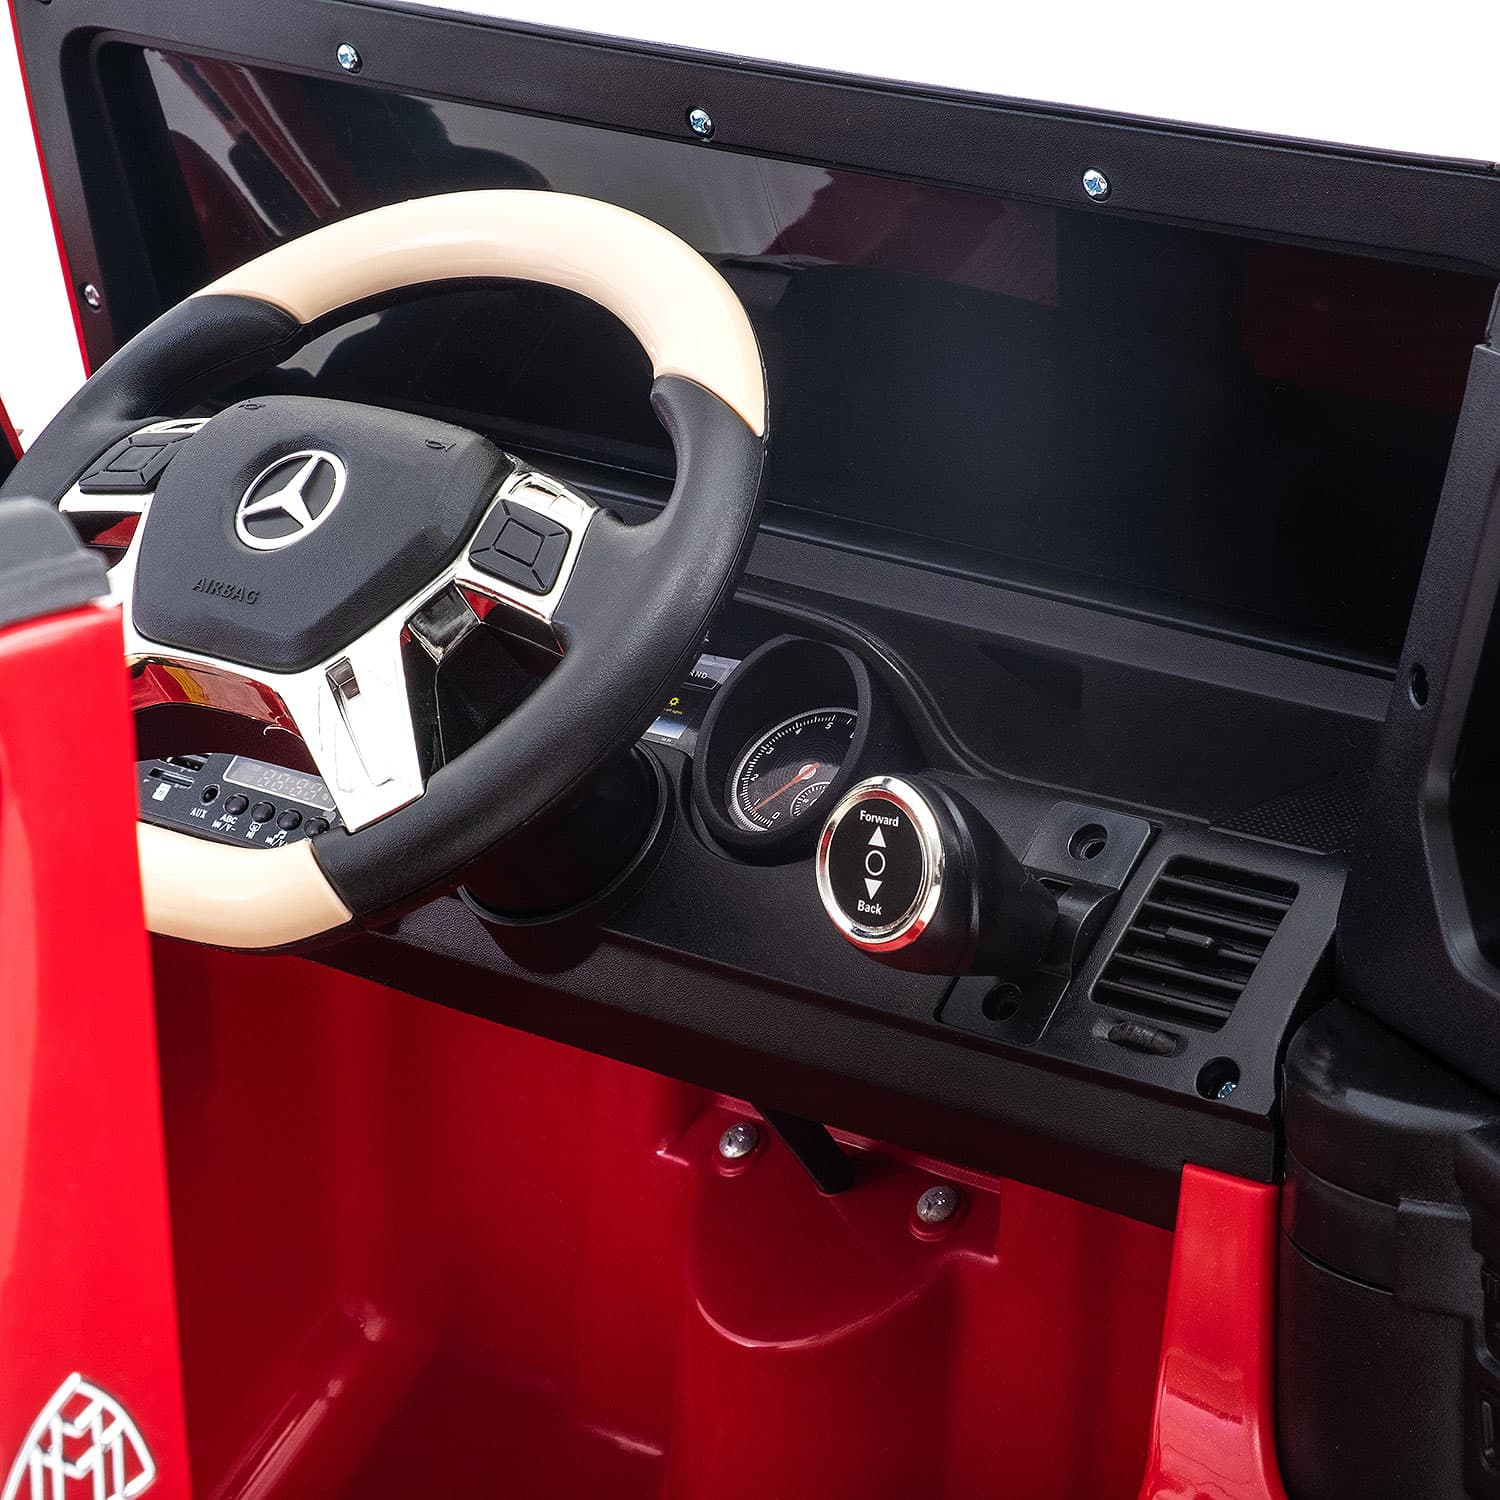 Mercedes Maybach G650 12v Kids Ride-on Car With Parental Remote | Cherry Red